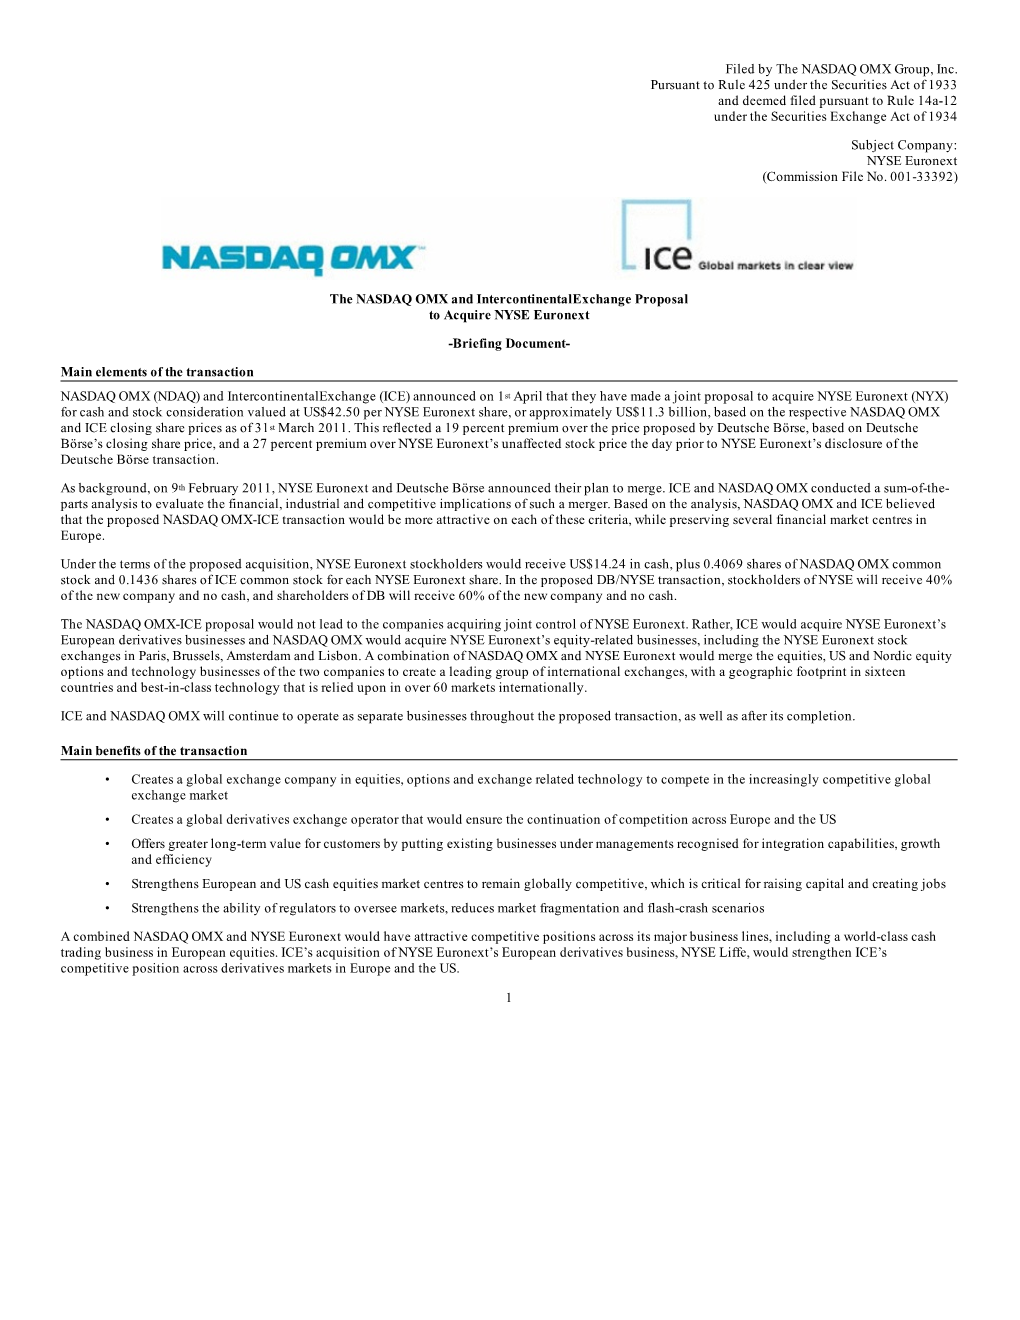 Filed by the NASDAQ OMX Group, Inc. Pursuant to Rule 425 Under